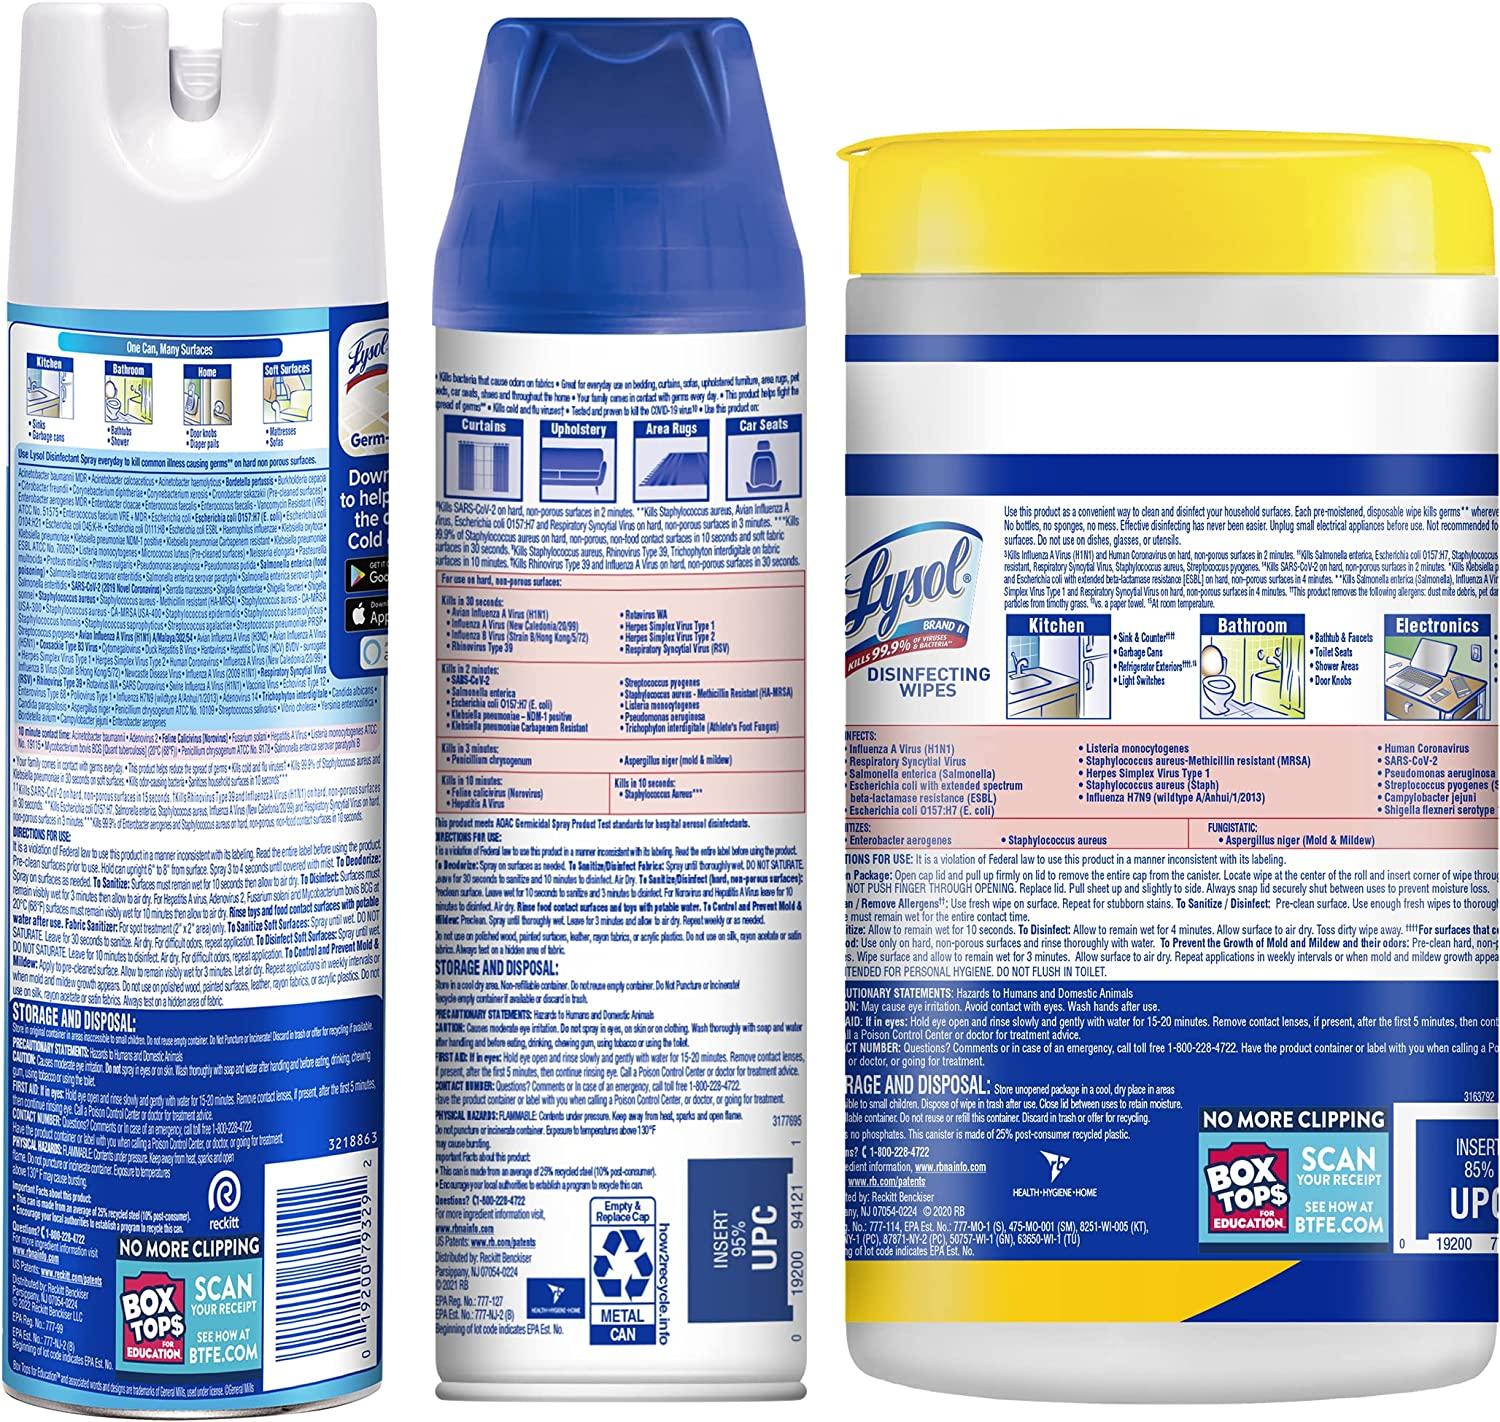 Lysol Disinfectant Spray: Disinfecting Tips + Where to Buy It